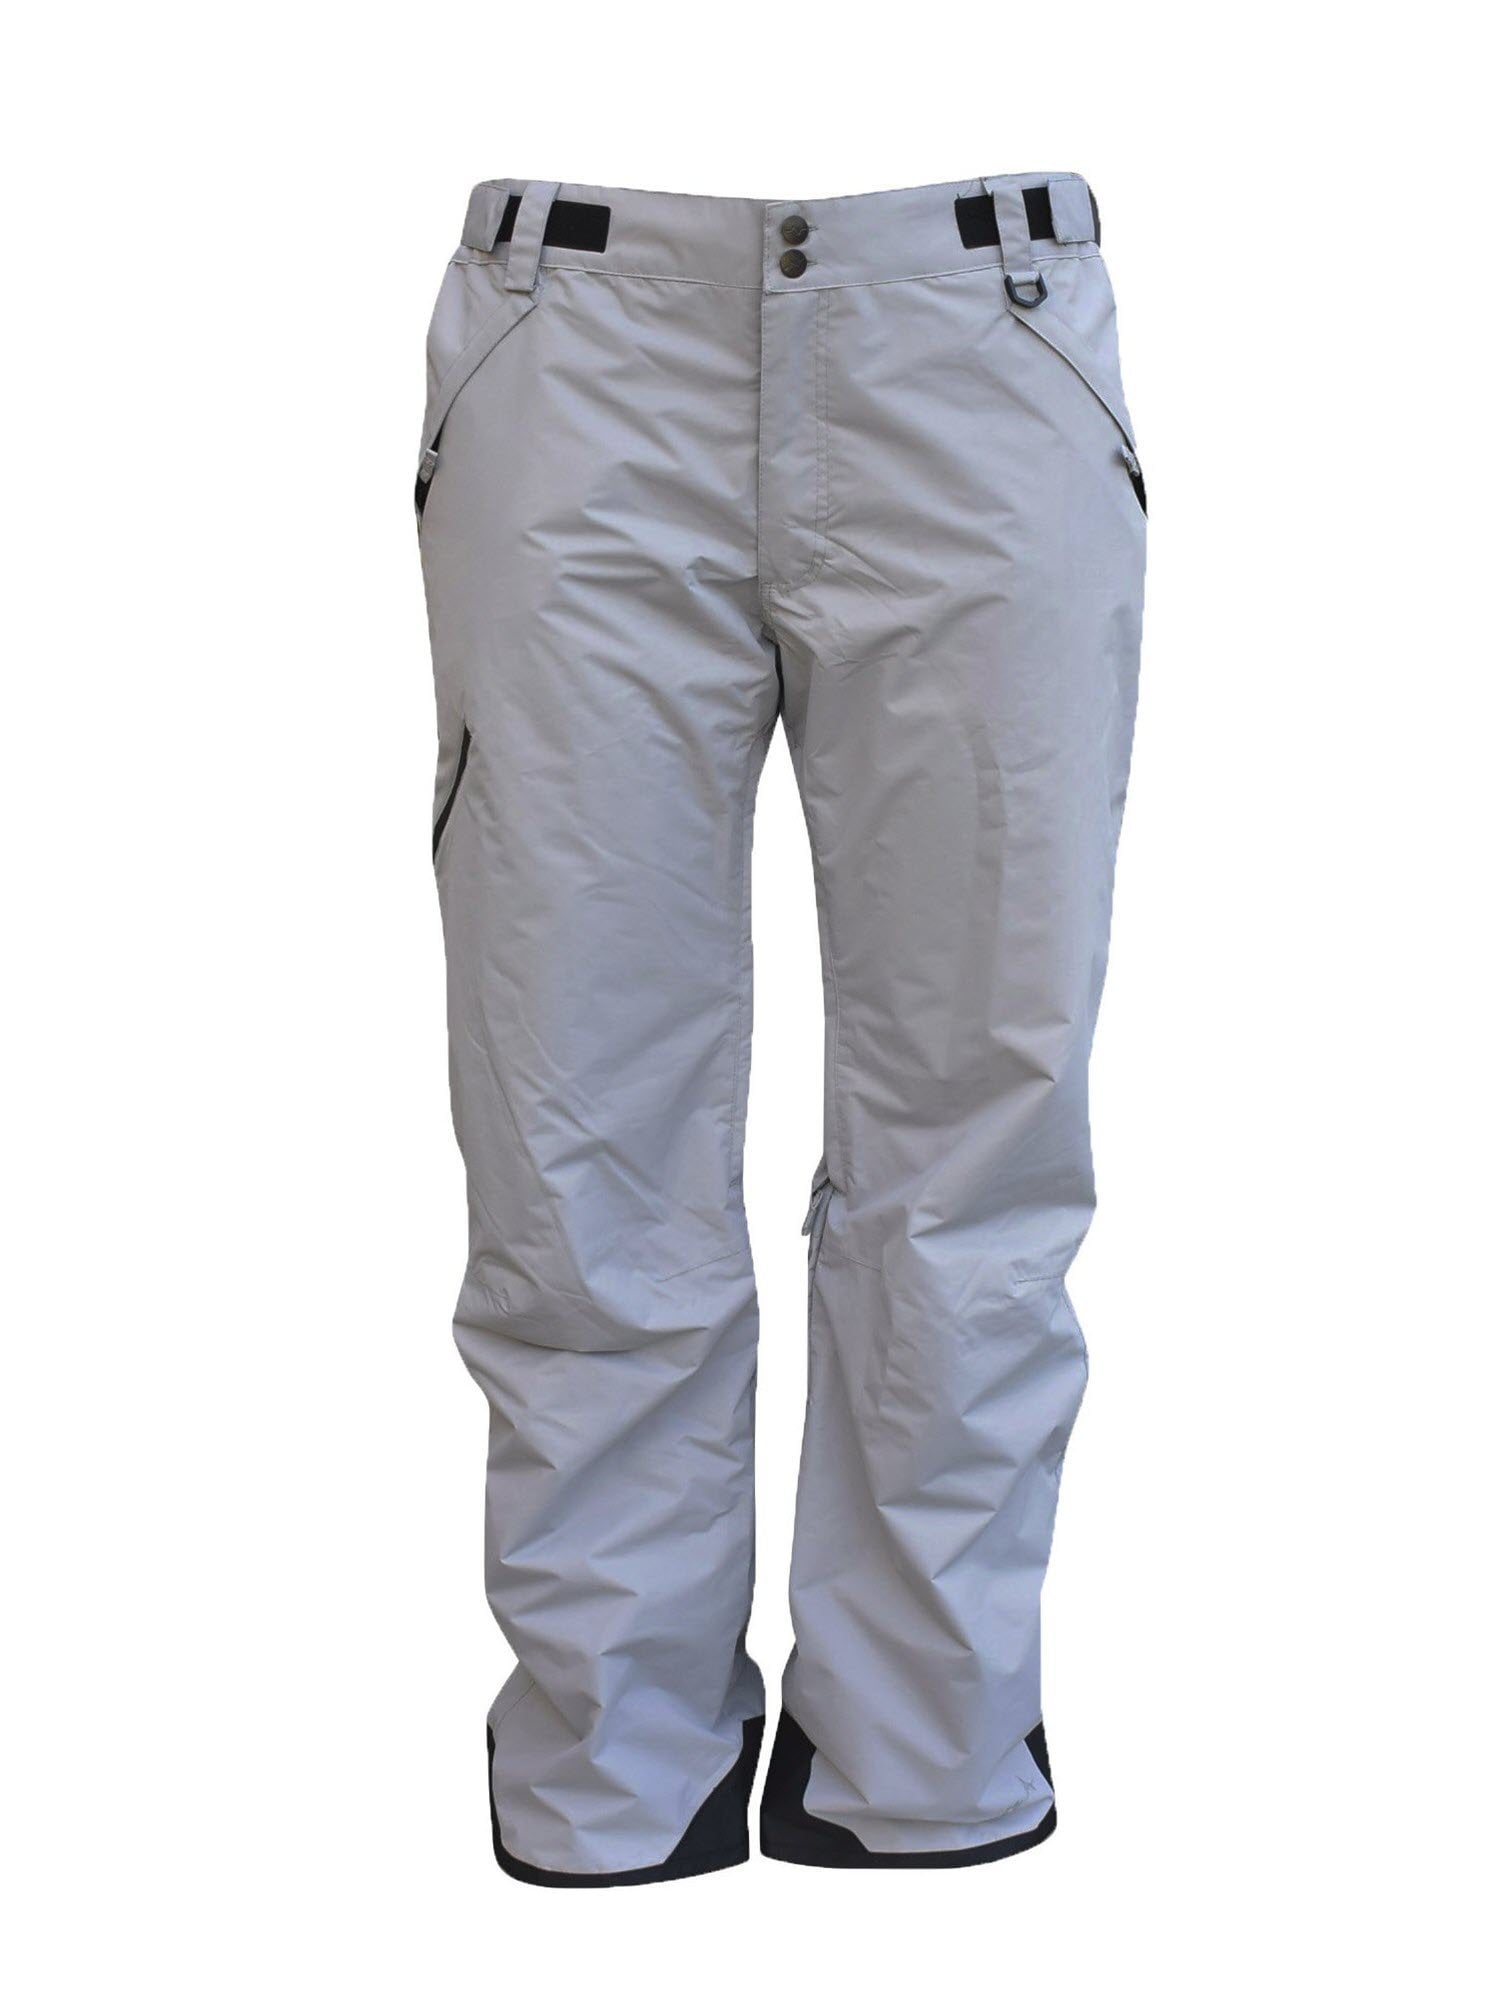 Pulse Mens Rider Technical Snowboard Ski Snow Pants Insulated S - 2X 